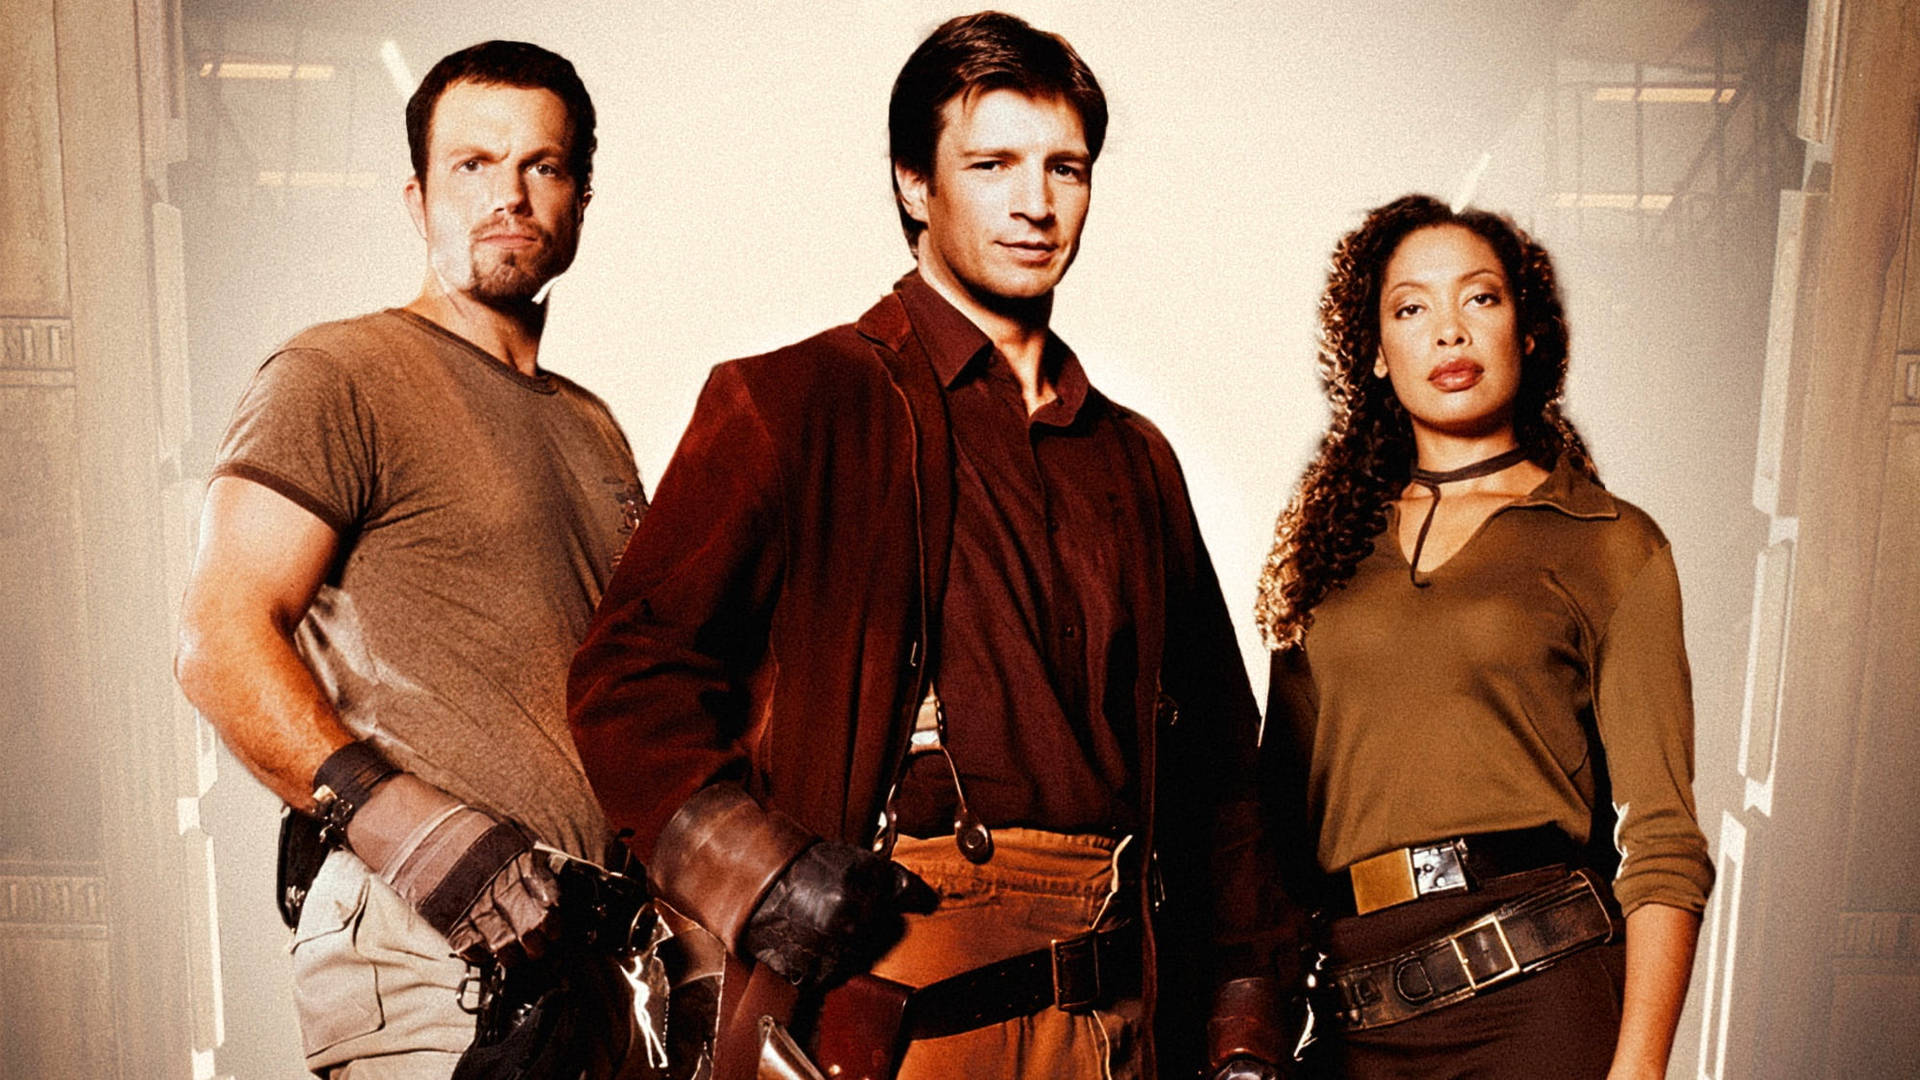 Nathan Fillion Brown Clothes Firefly Background